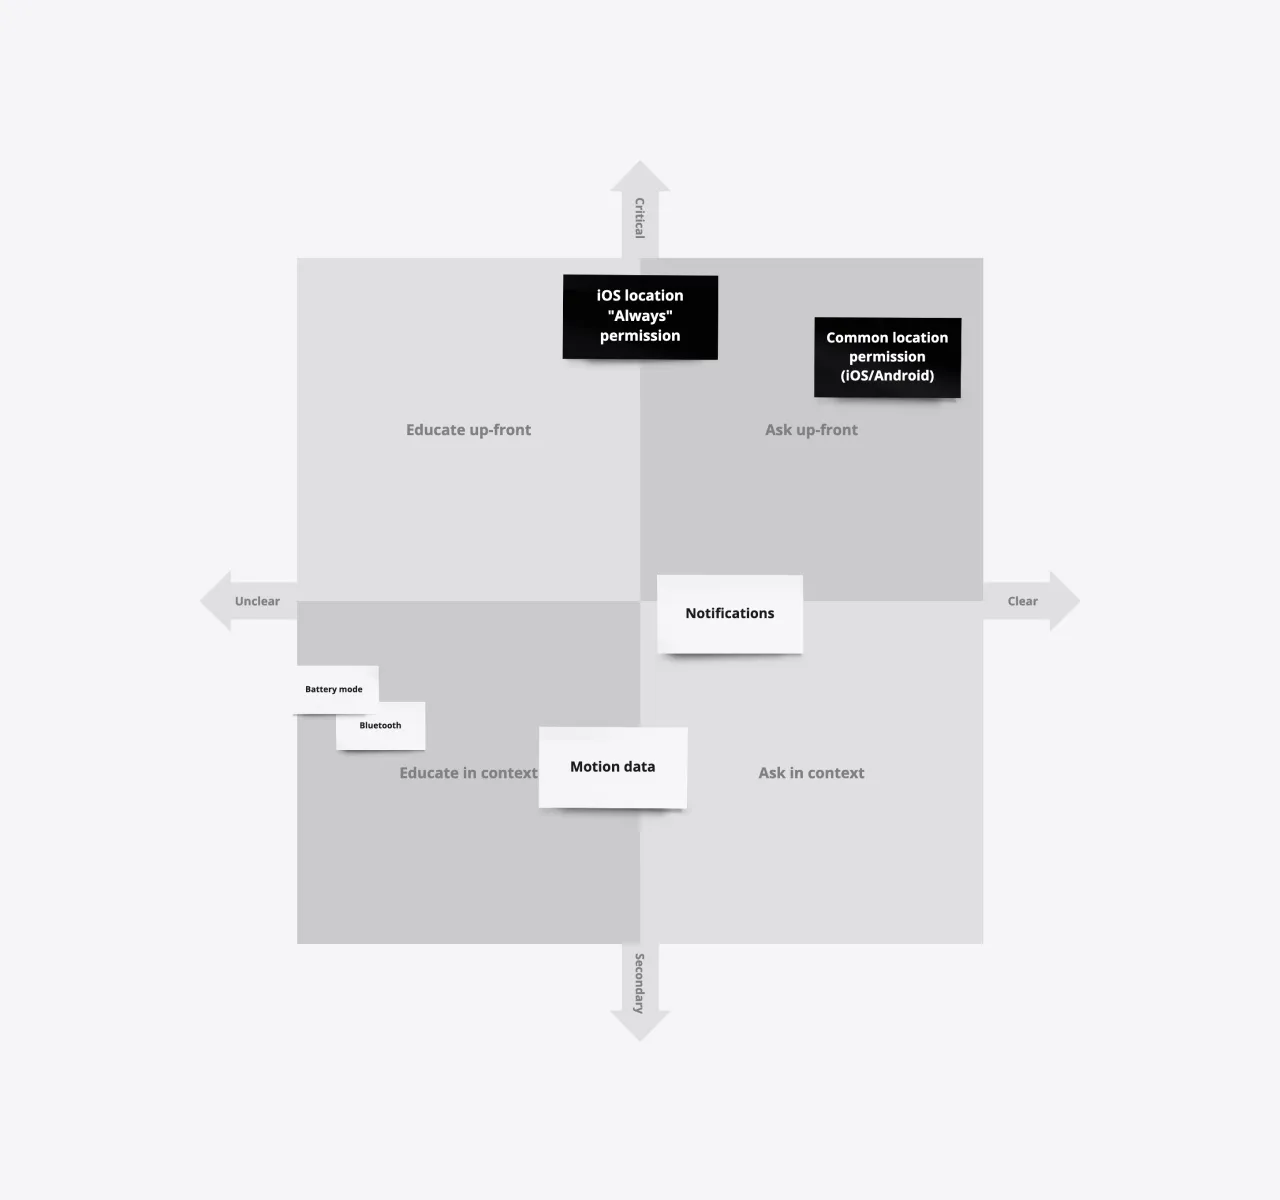 Check in Be out contextual permission decision diagram